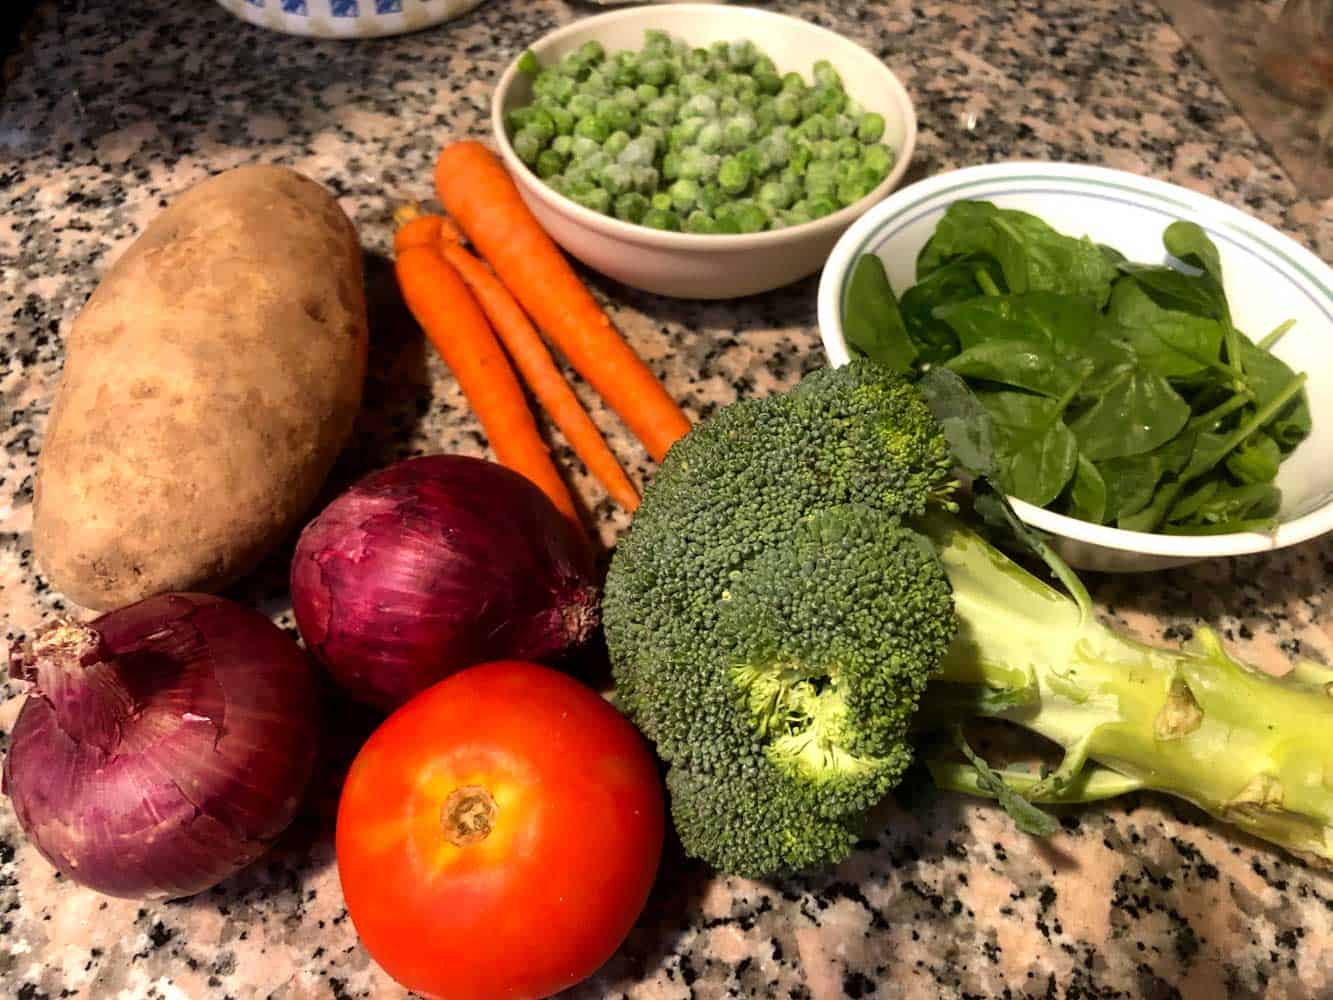 Ingredients of Mixed vegetable curry - potato, carrot, frozen green peas, spinach, broccoli, onion and tomato